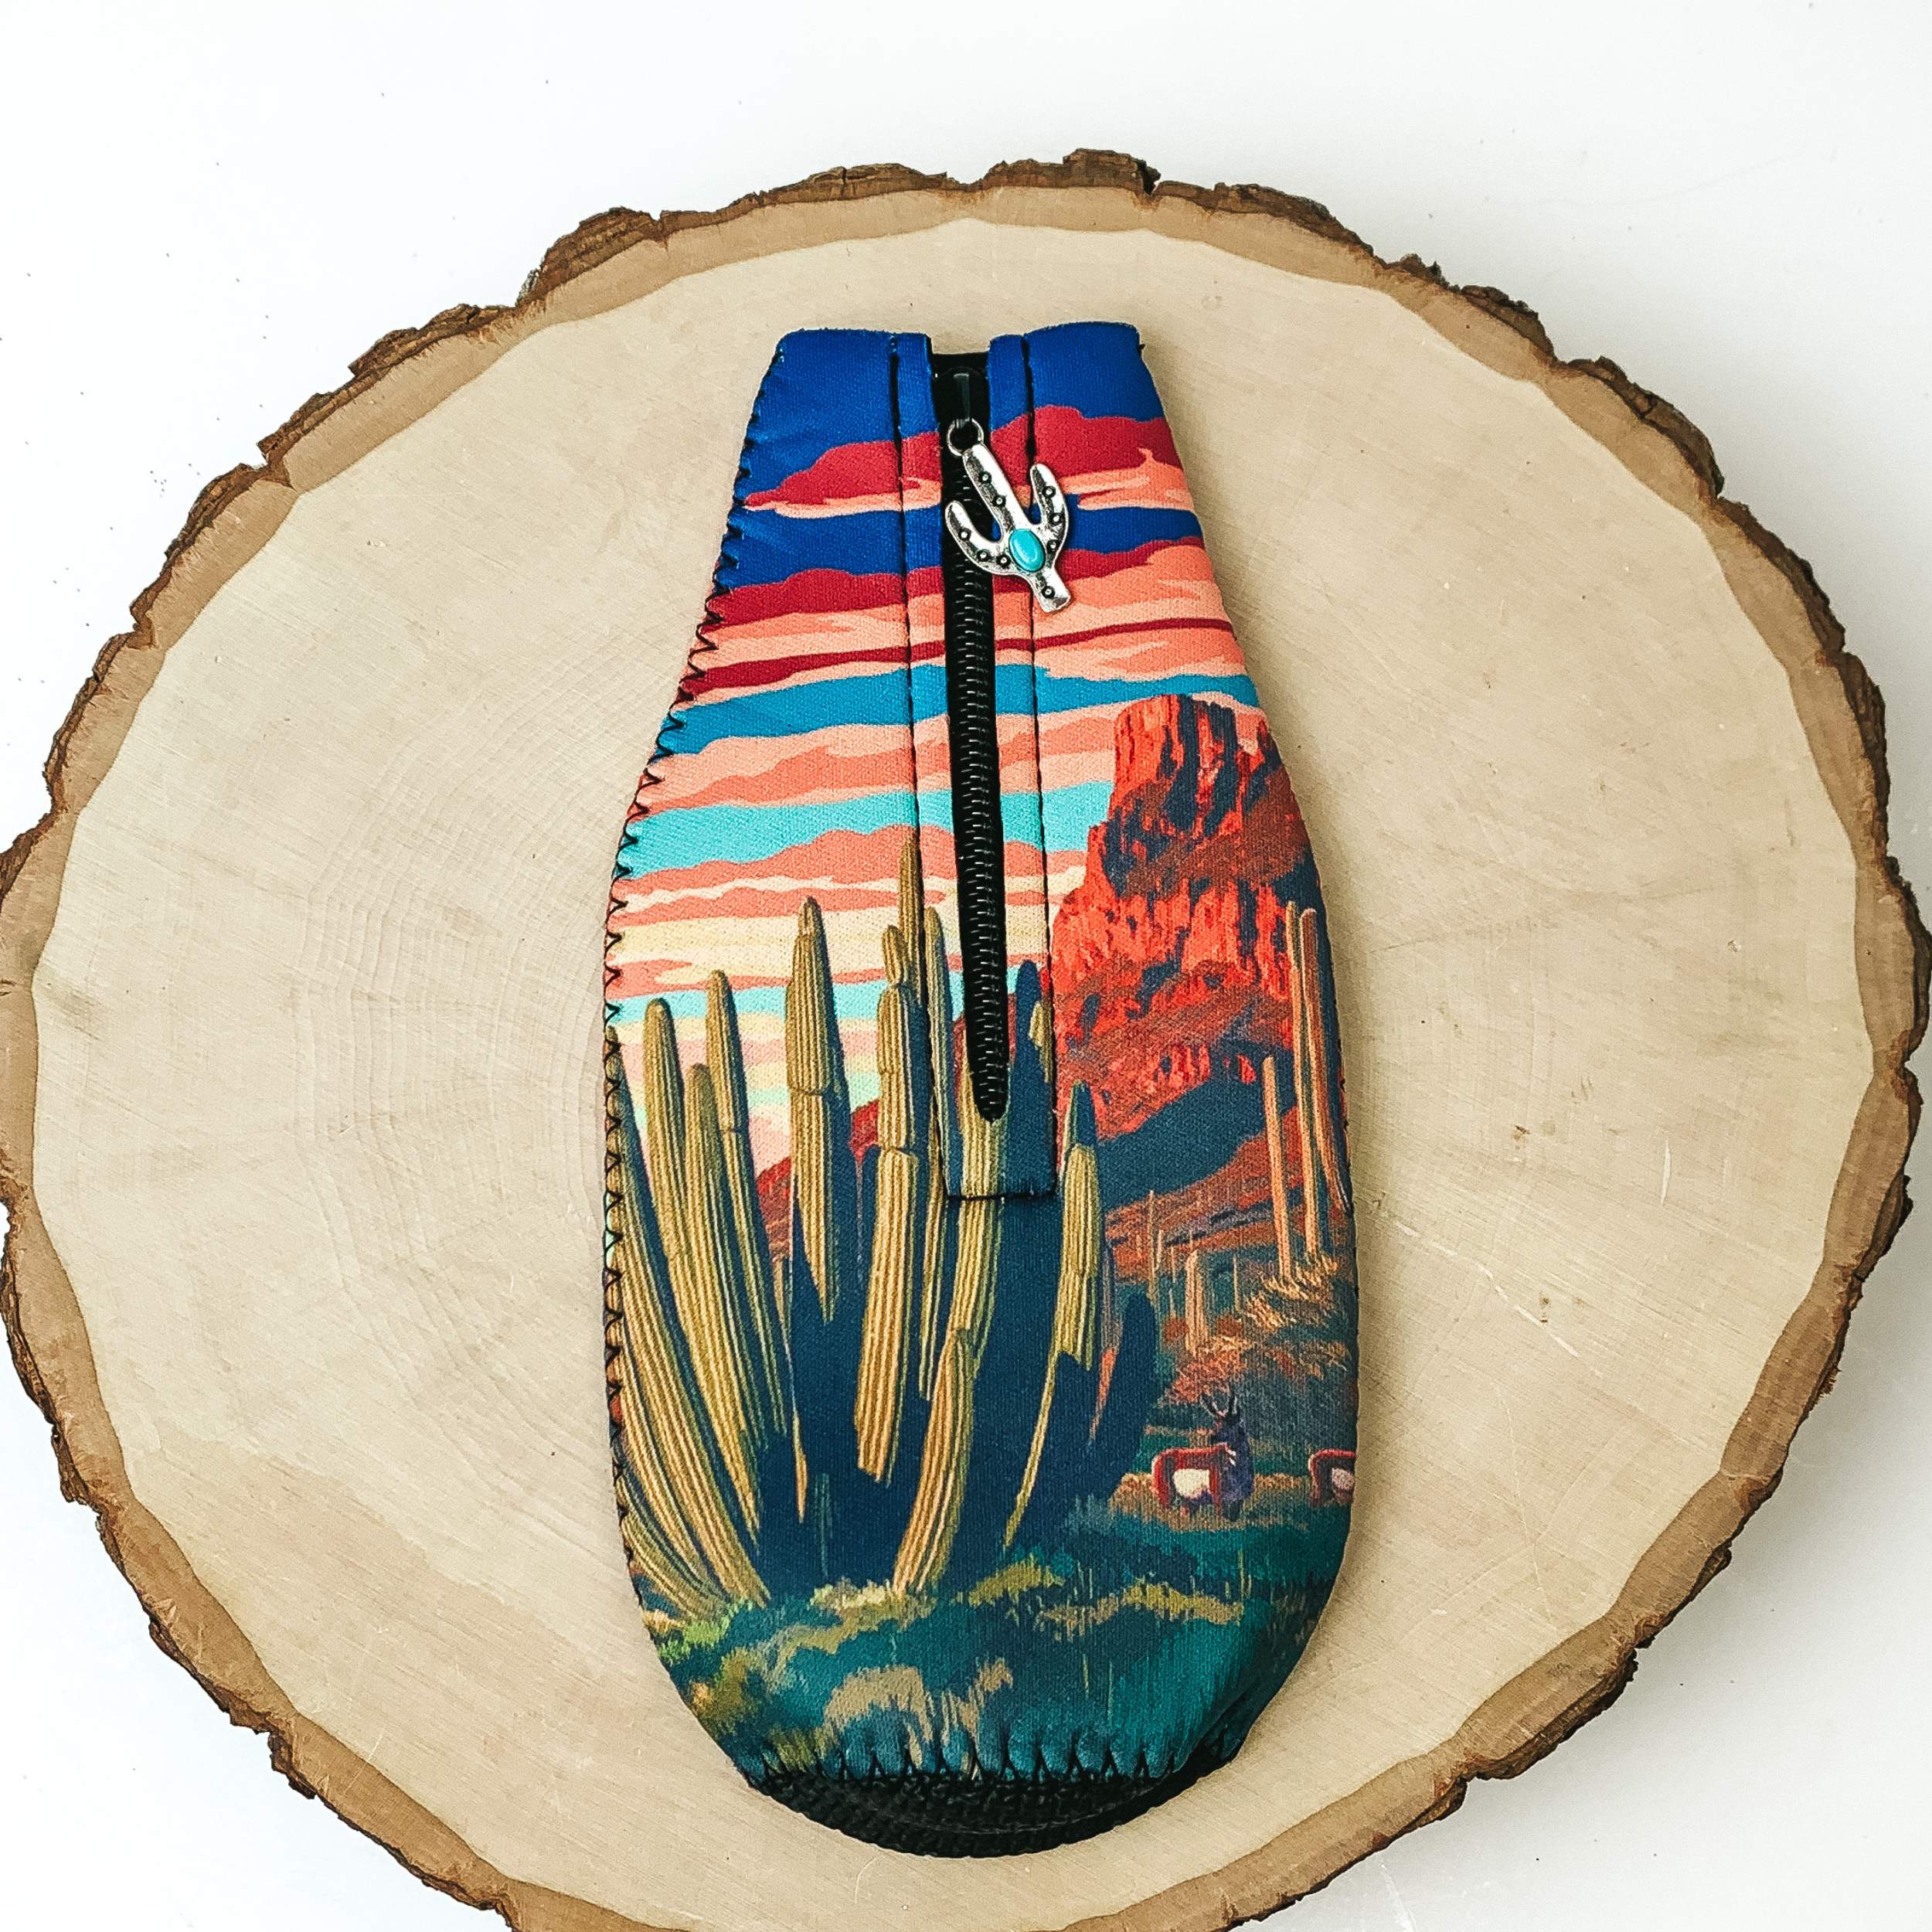 This Cactus Landscape Zip Up Koozie with Multicolored Sky with Cactus Charm is pictured on a peice of wood, with a white background. 